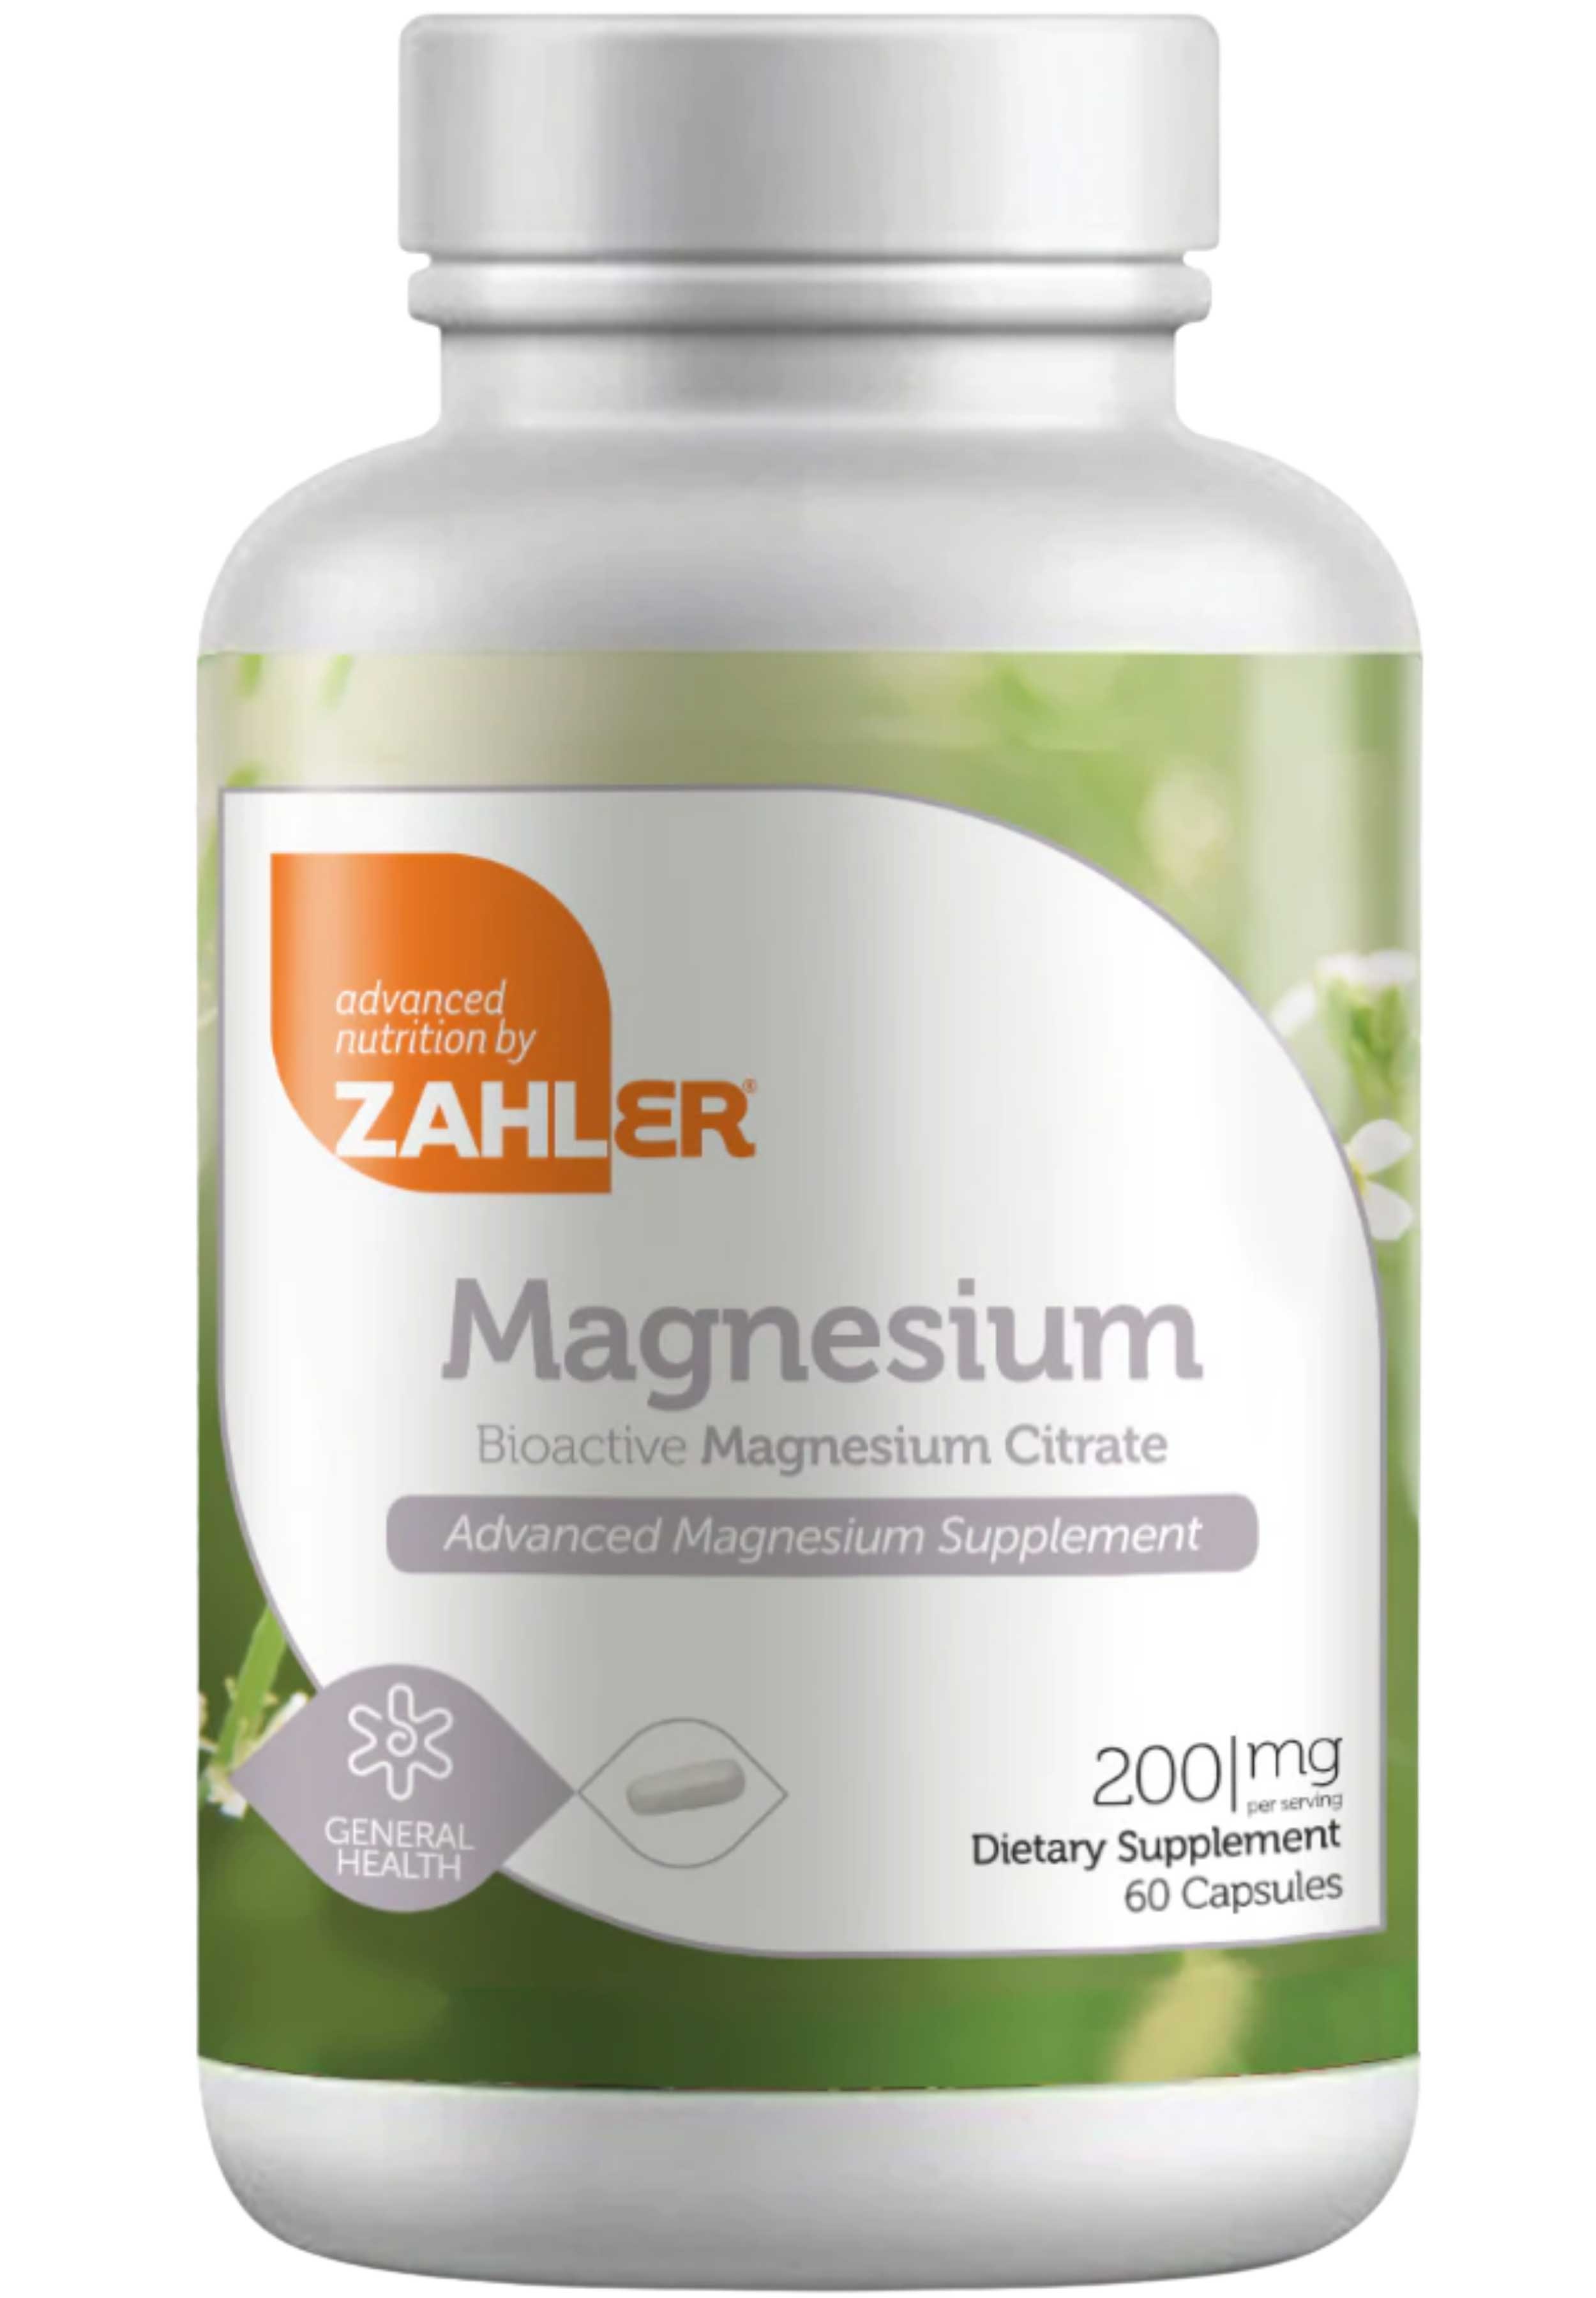 Advanced Nutrition By Zahler Magnesium Citrate